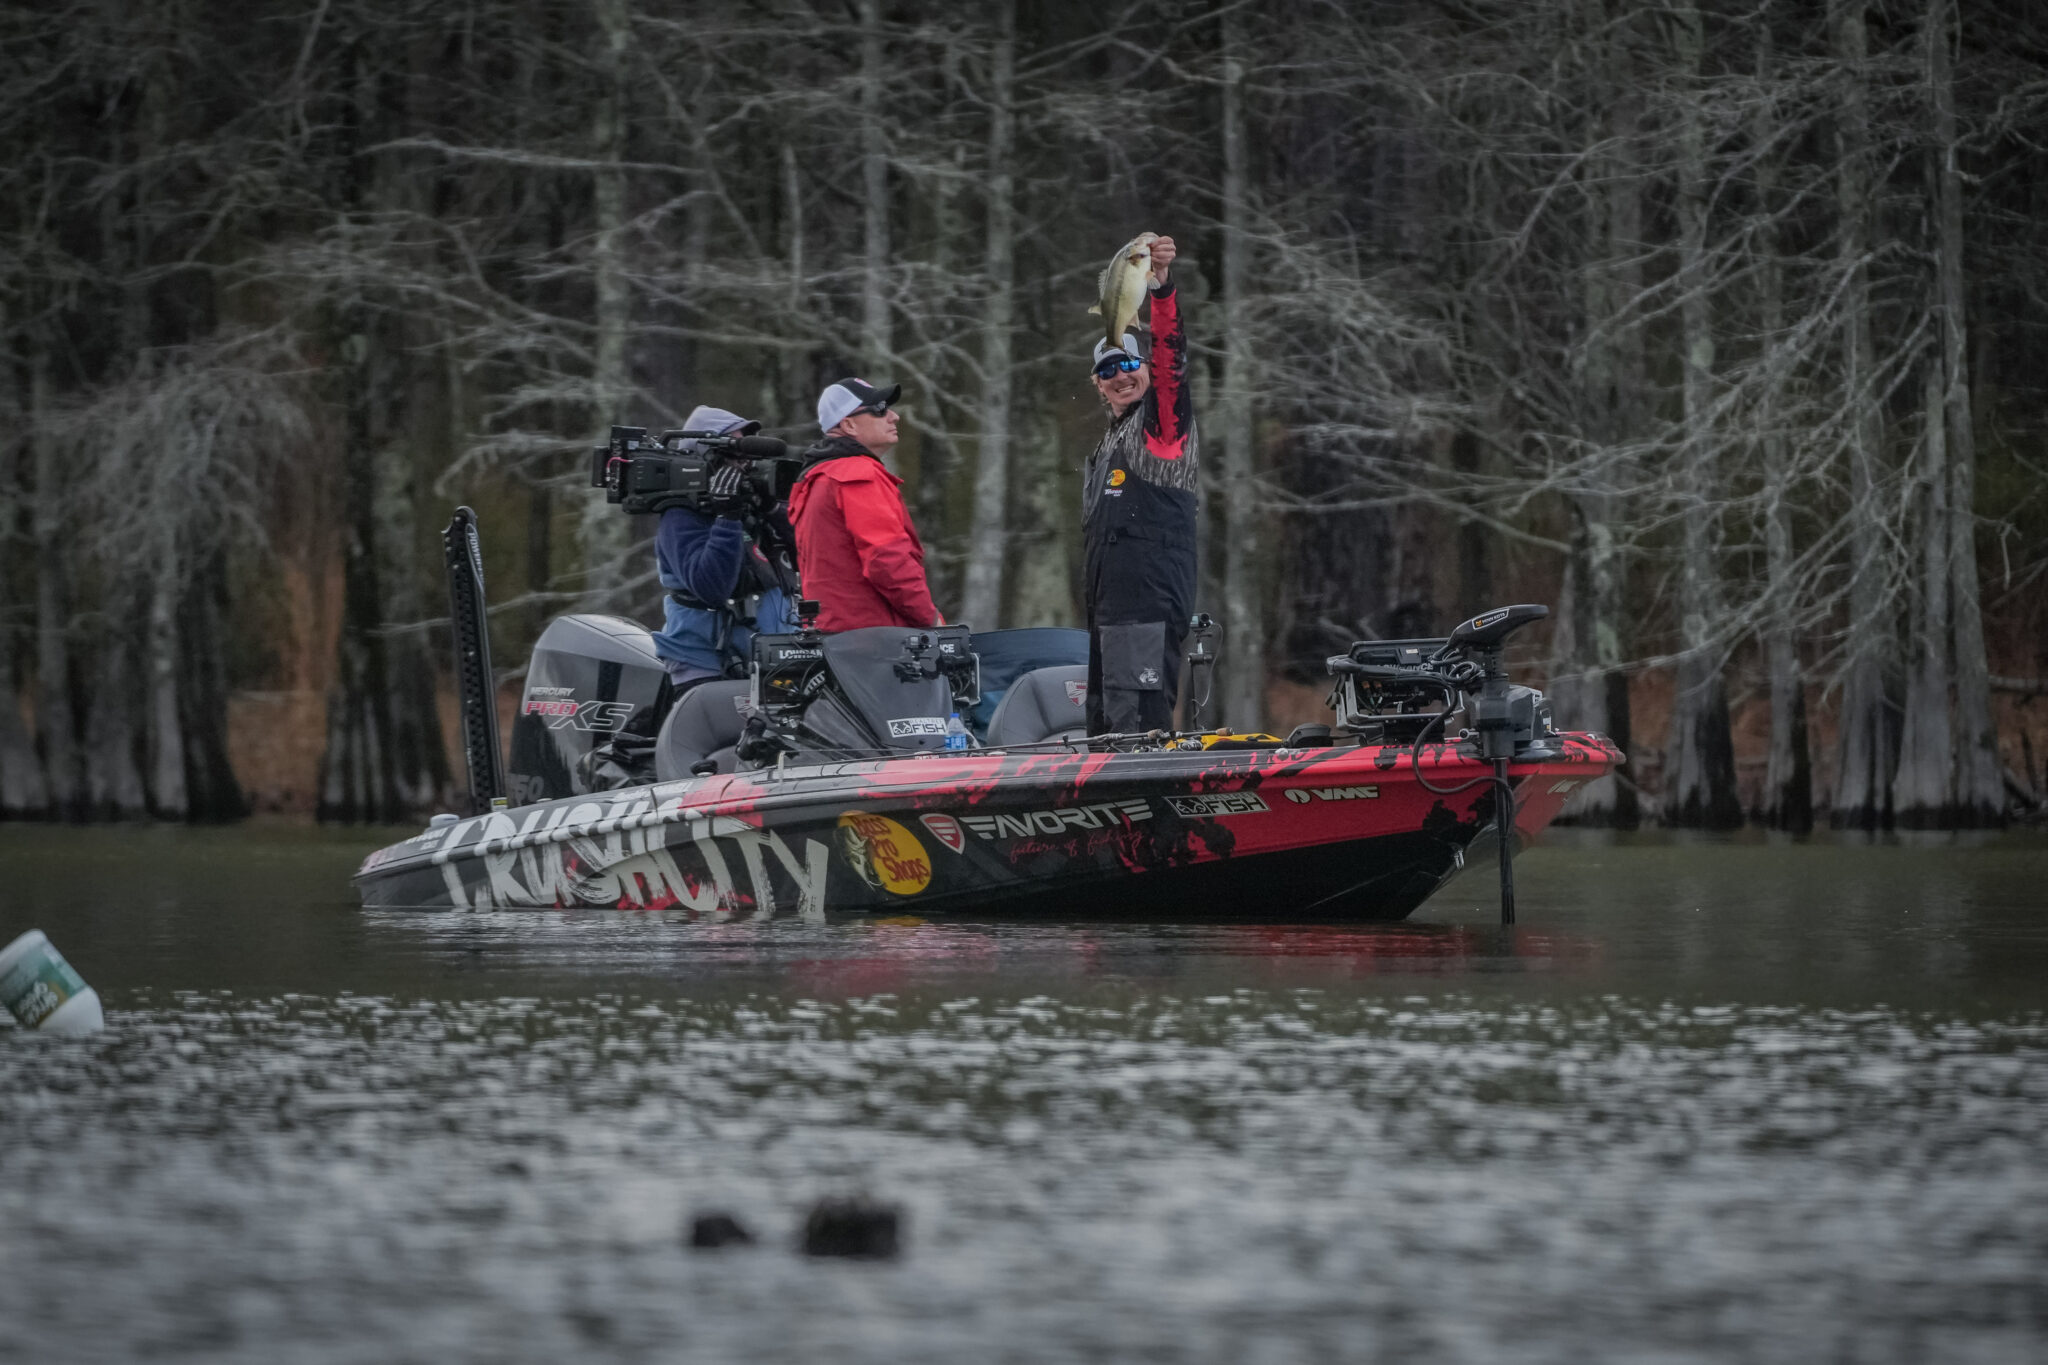 Top 10 baits and patterns: Minnow madness on Toledo Bend - Major